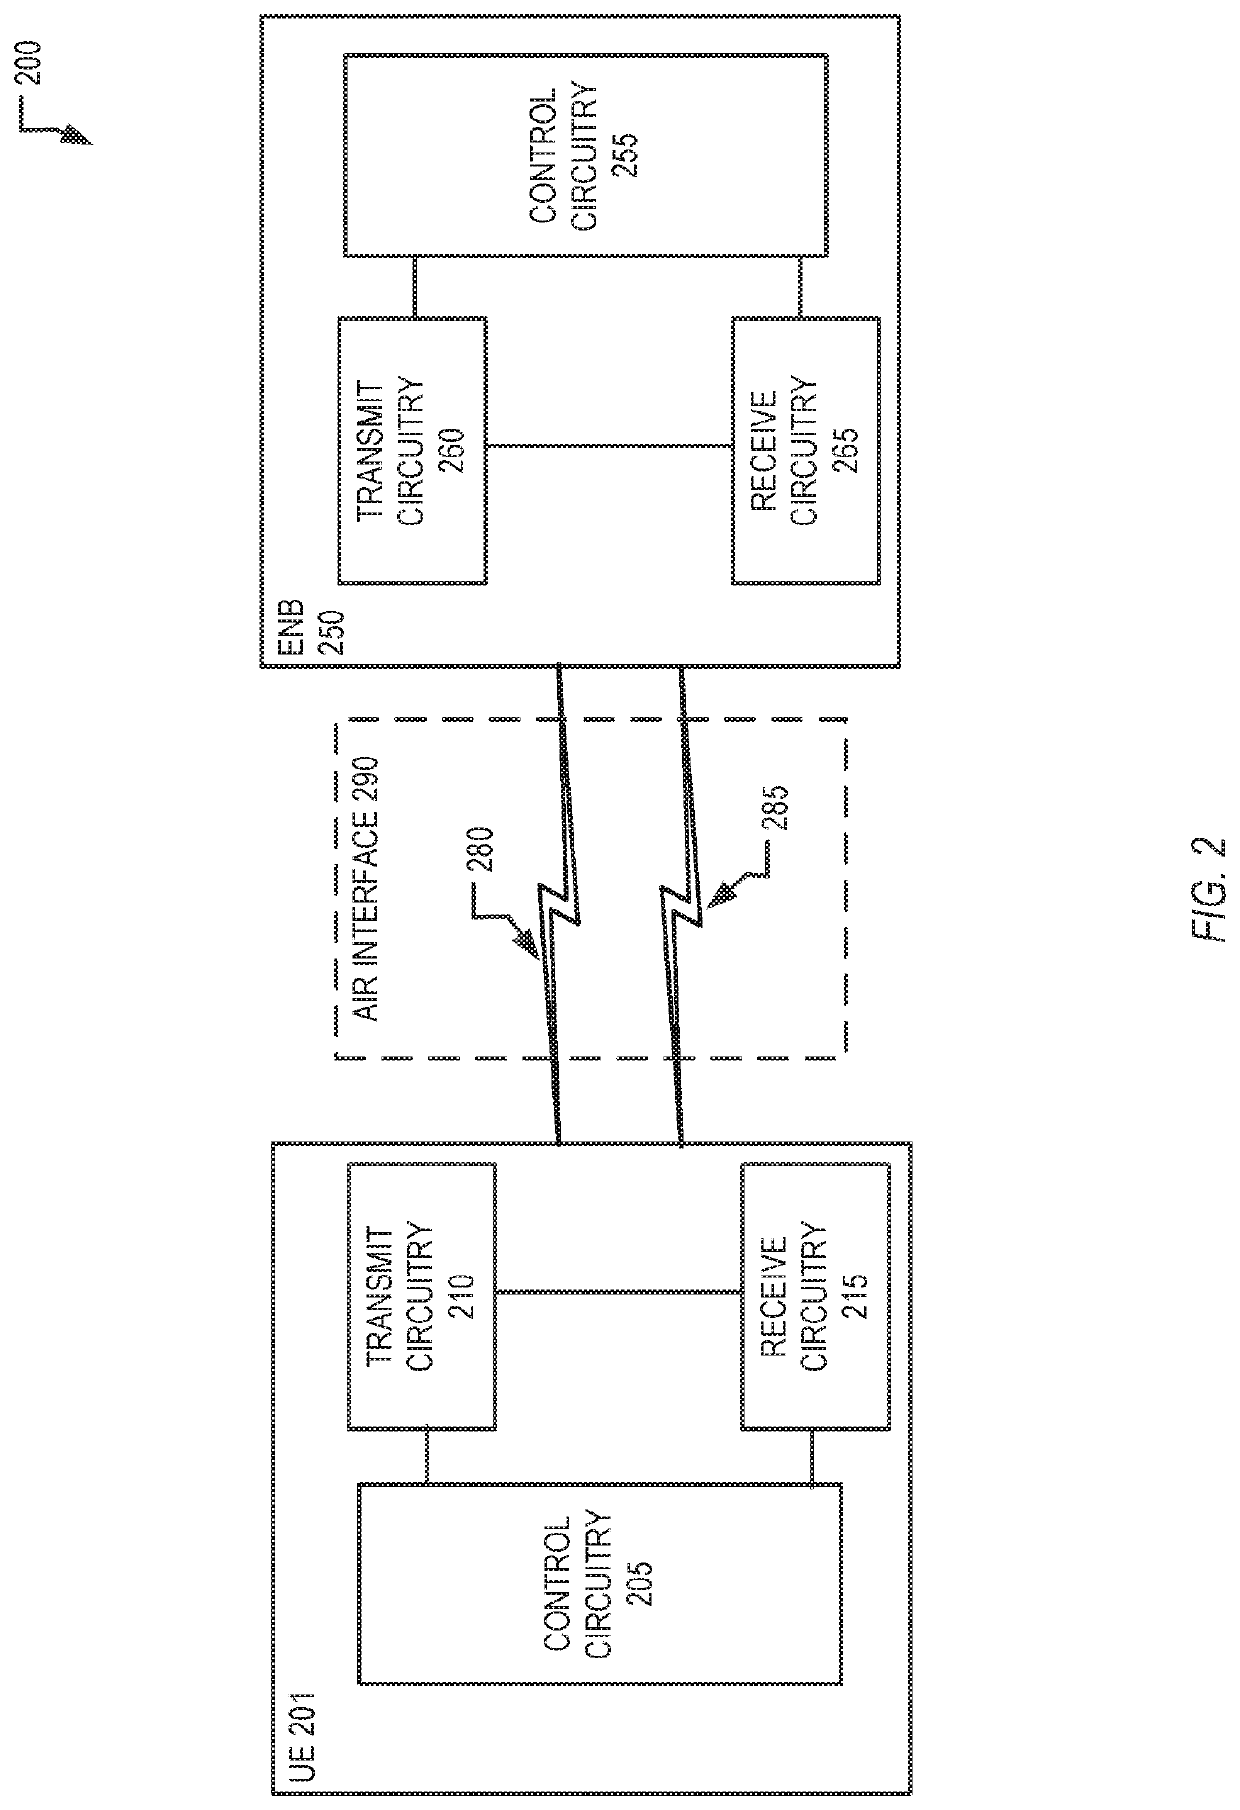 Apparatus and method for IoT control channel